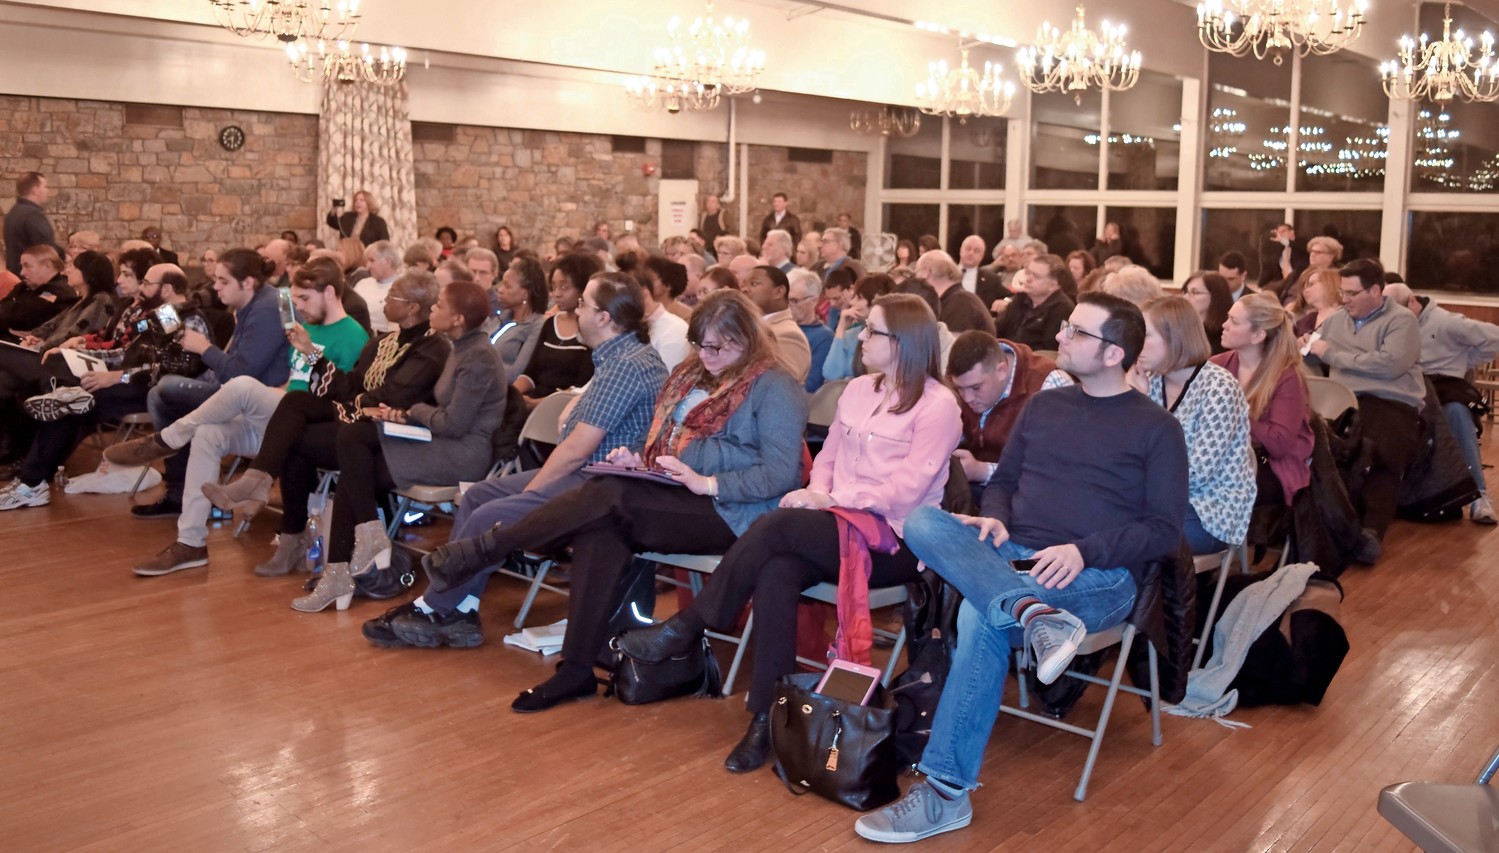 More than 60 people attended the forum at the Merrick Golf Course Clubhouse on Jan. 25.